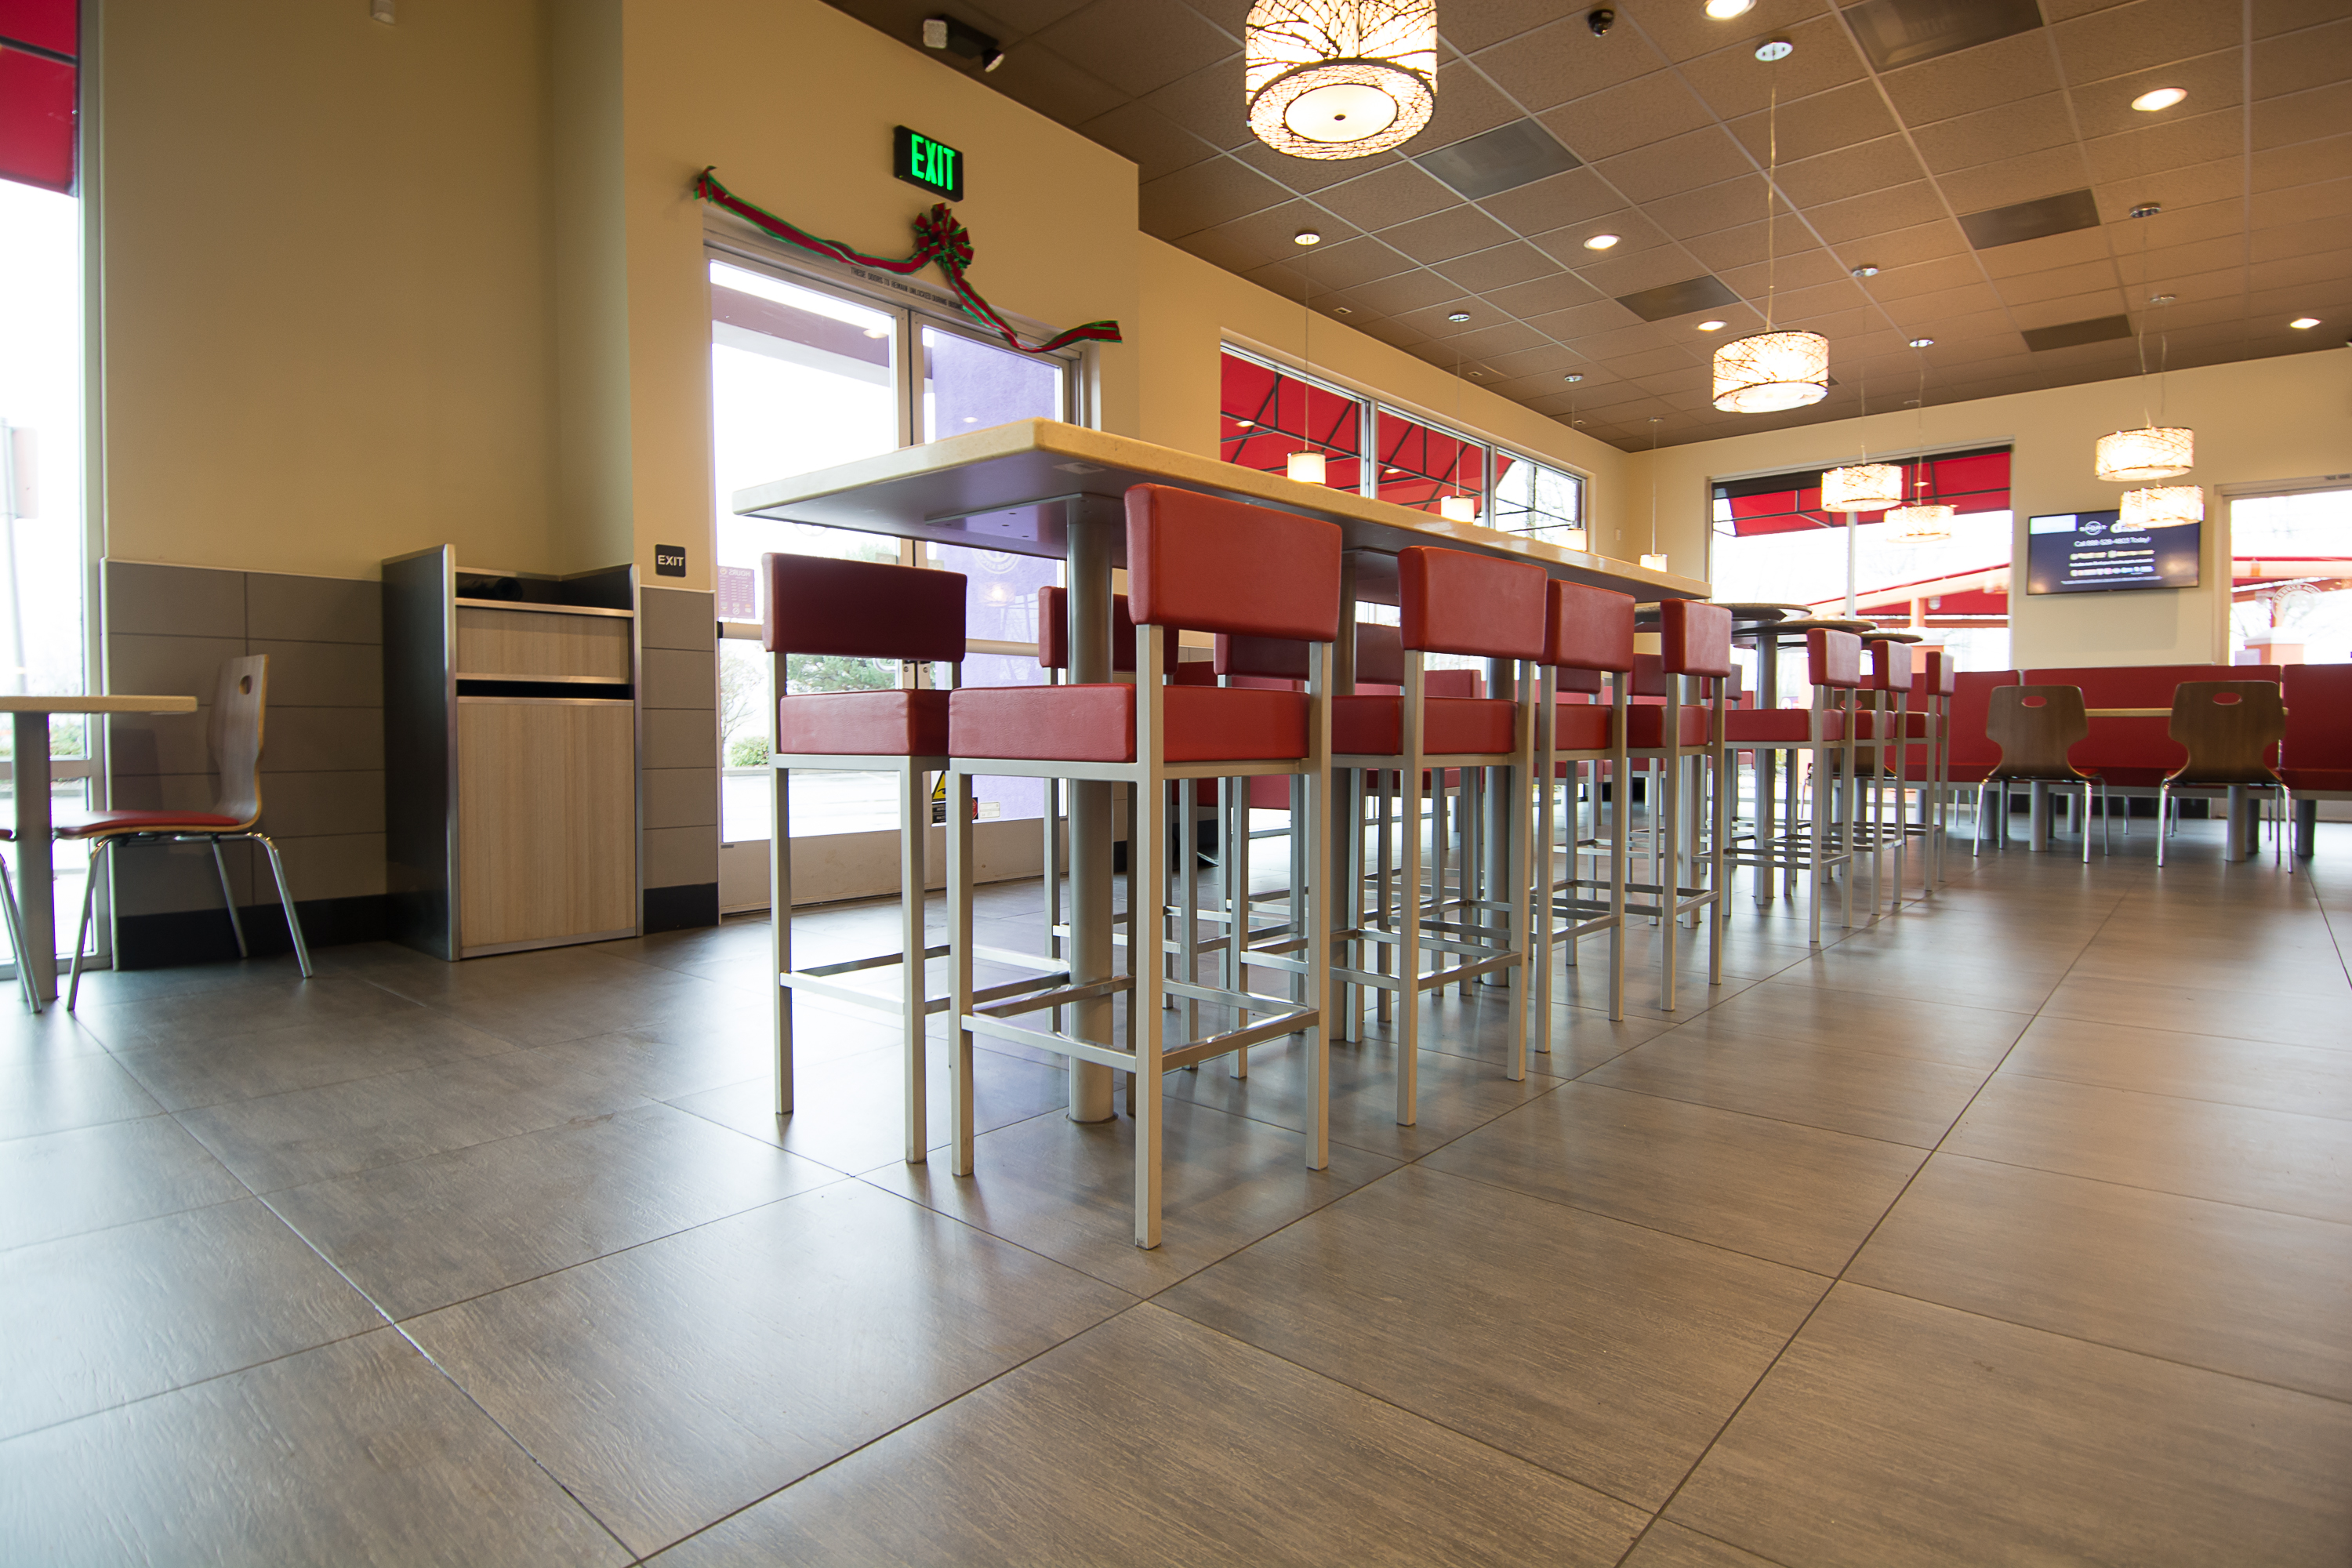 Nw Flooring Solutions Panda Express Image Proview